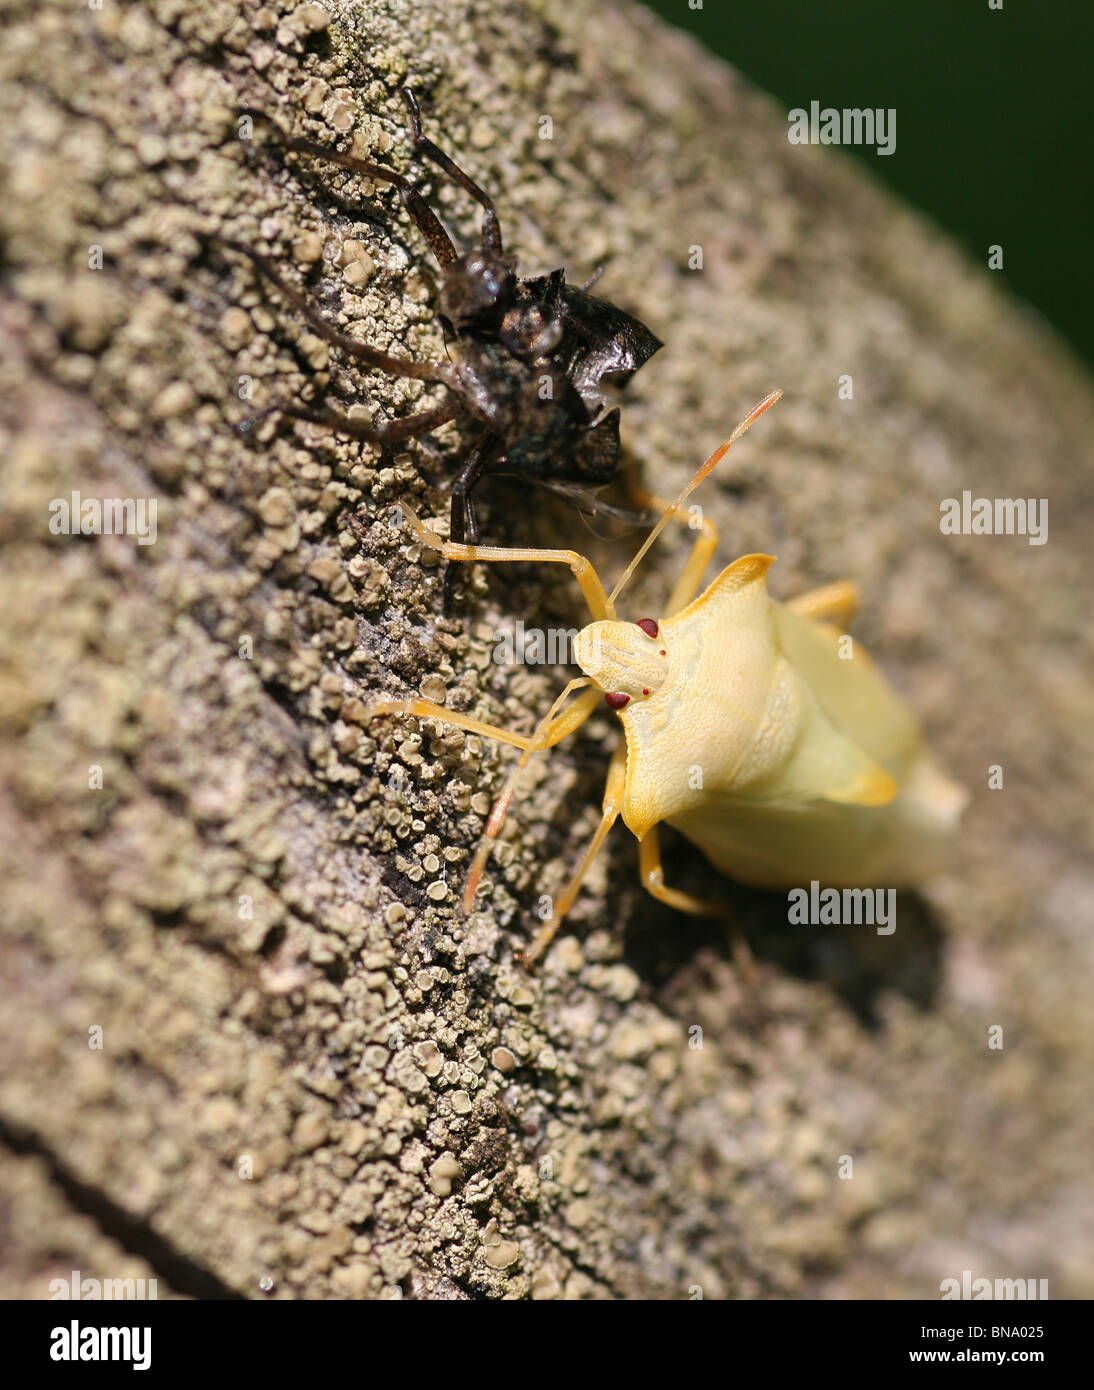 A green Shield or Stink Bug (Palomena prasina) drying in the sun after shedding it's skin, with the discarded skin next to it. Stock Photo